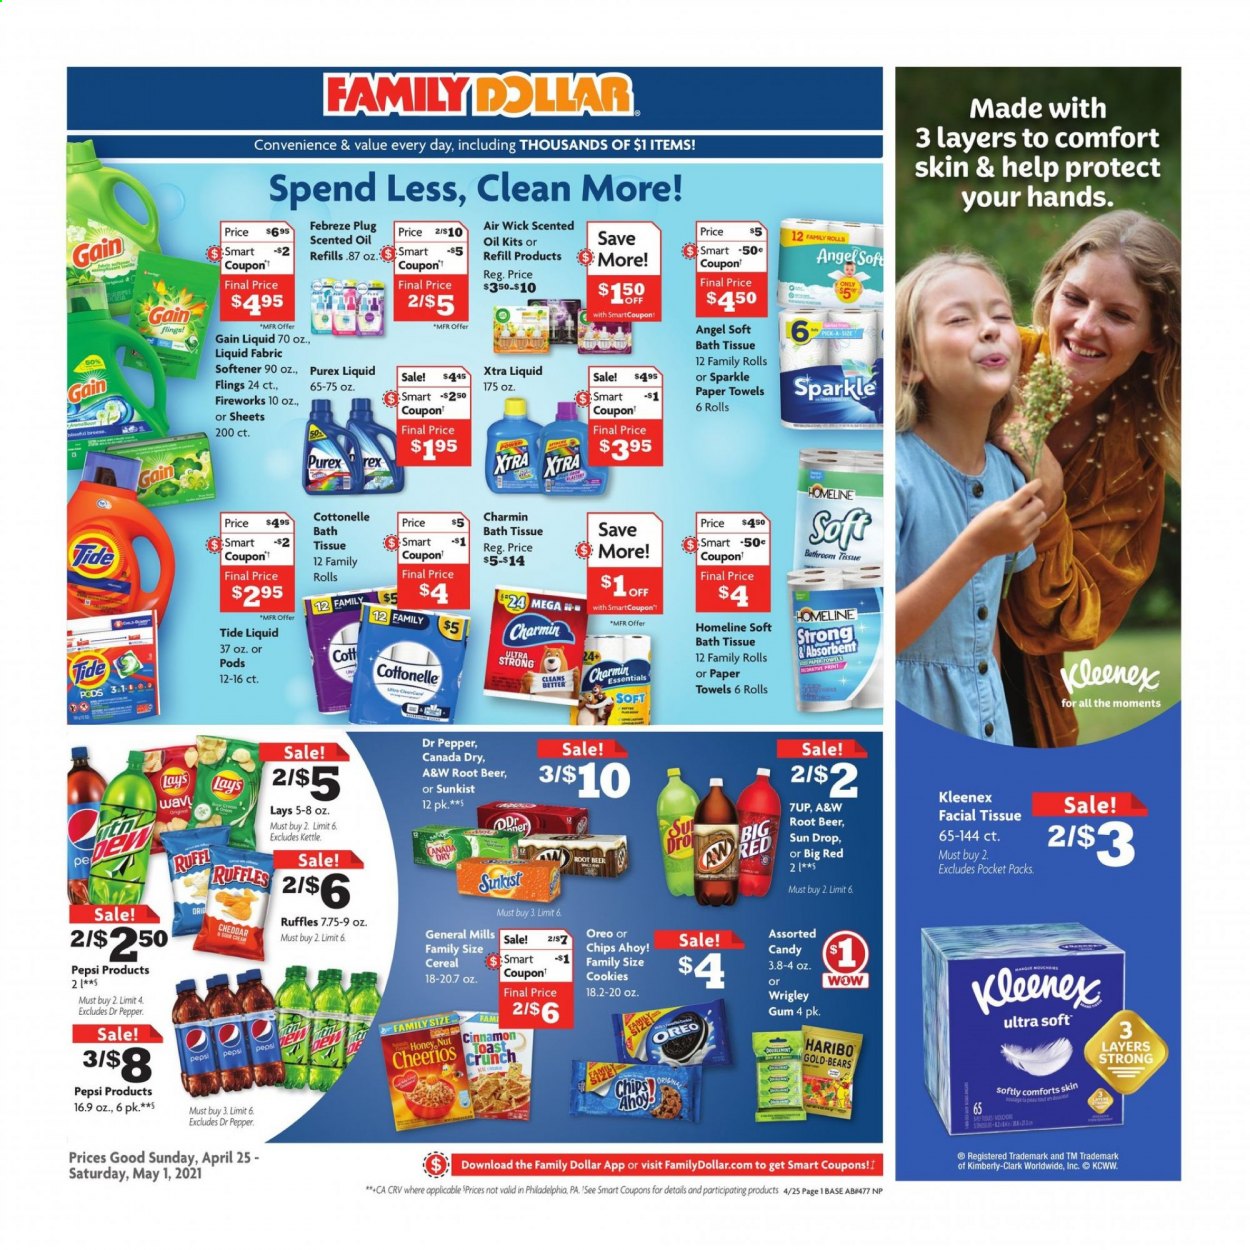 thumbnail - Family Dollar Flyer - 04/25/2021 - 05/01/2021 - Sales products - cookies, Haribo, Chips Ahoy!, chips, Lay’s, Ruffles, cereals, Cheerios, oil, Canada Dry, Pepsi, Dr. Pepper, 7UP, A&W, beer, bath tissue, Cottonelle, Kleenex, Rex, kitchen towels, paper towels, Charmin, Febreze, Gain, Tide, fabric softener, XTRA, Purex, Air Wick, scented oil, Moments. Page 1.